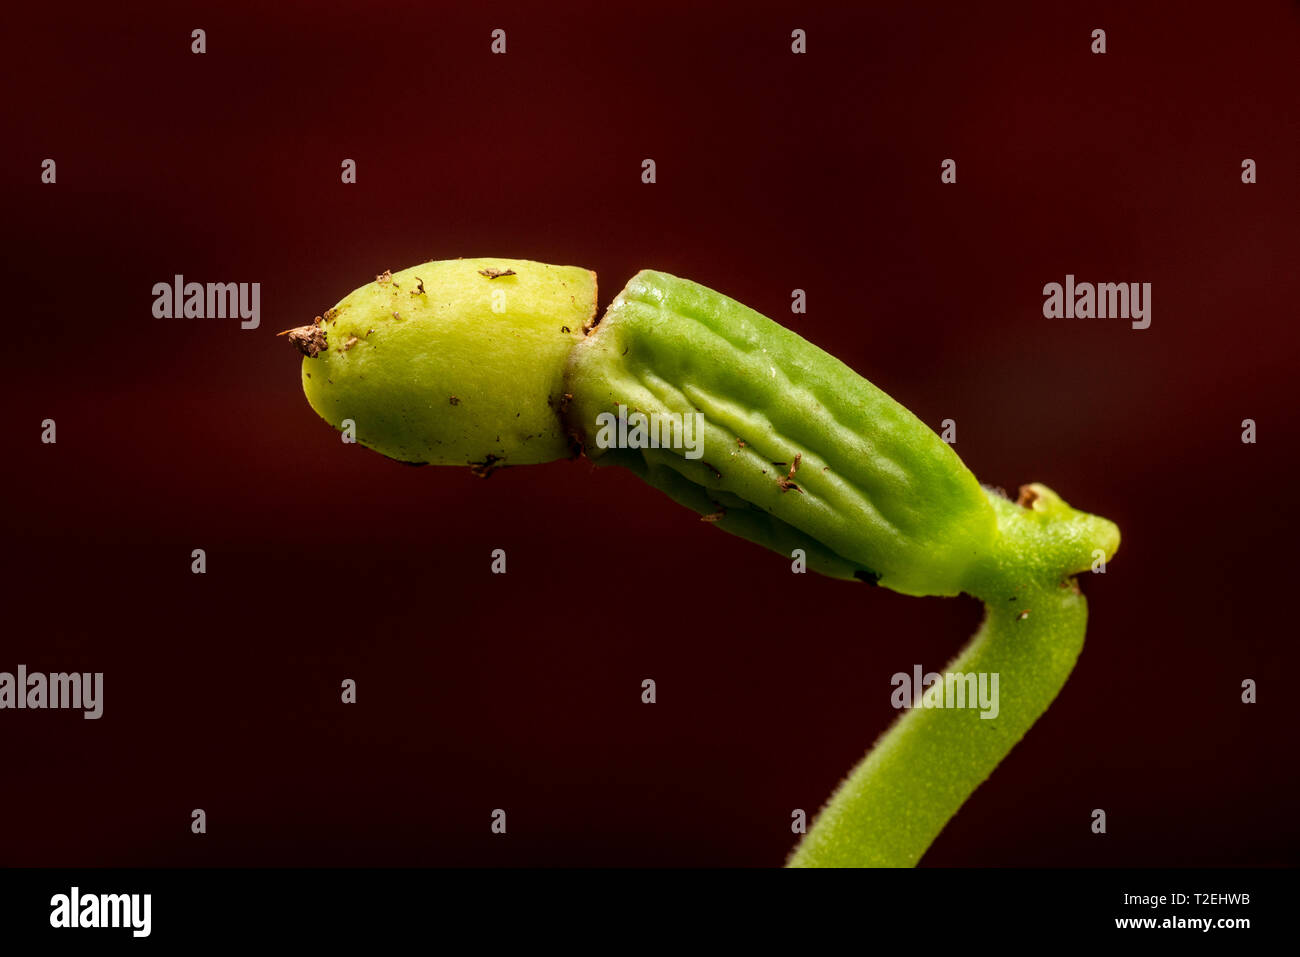 Horizontal bean sprout macro photograph with copy space. Stock Photo